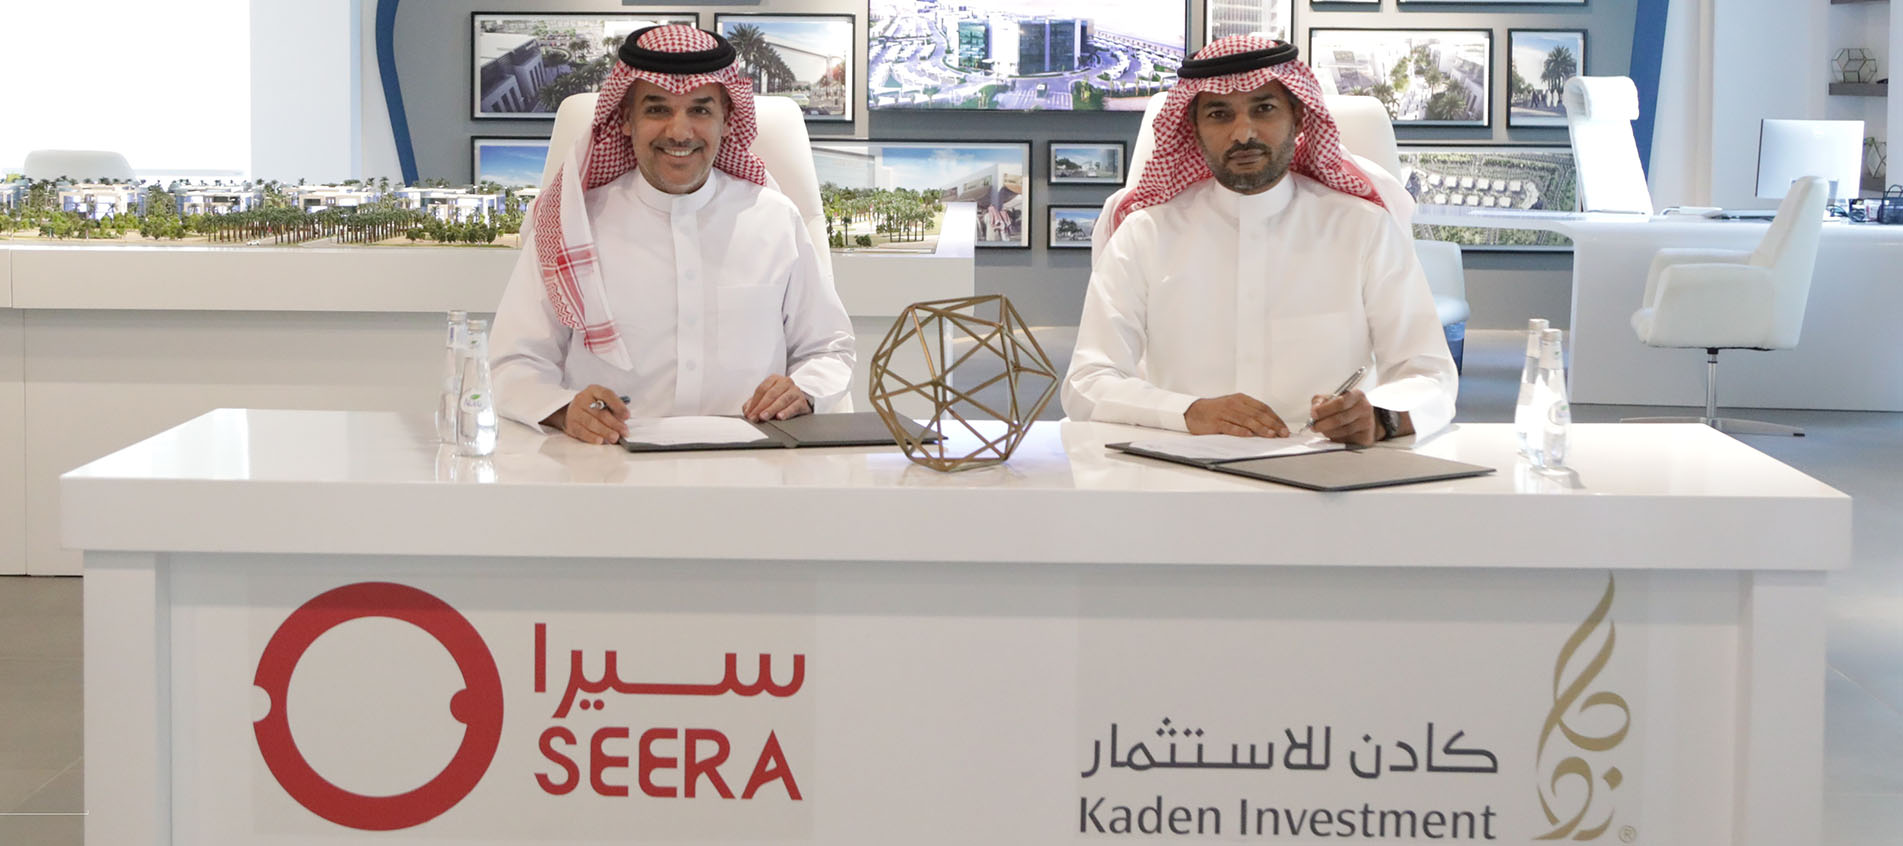  Kaden Investment Signs Strategic Partnership with Seera Group to Develop Hotels Across Saudi Arabia